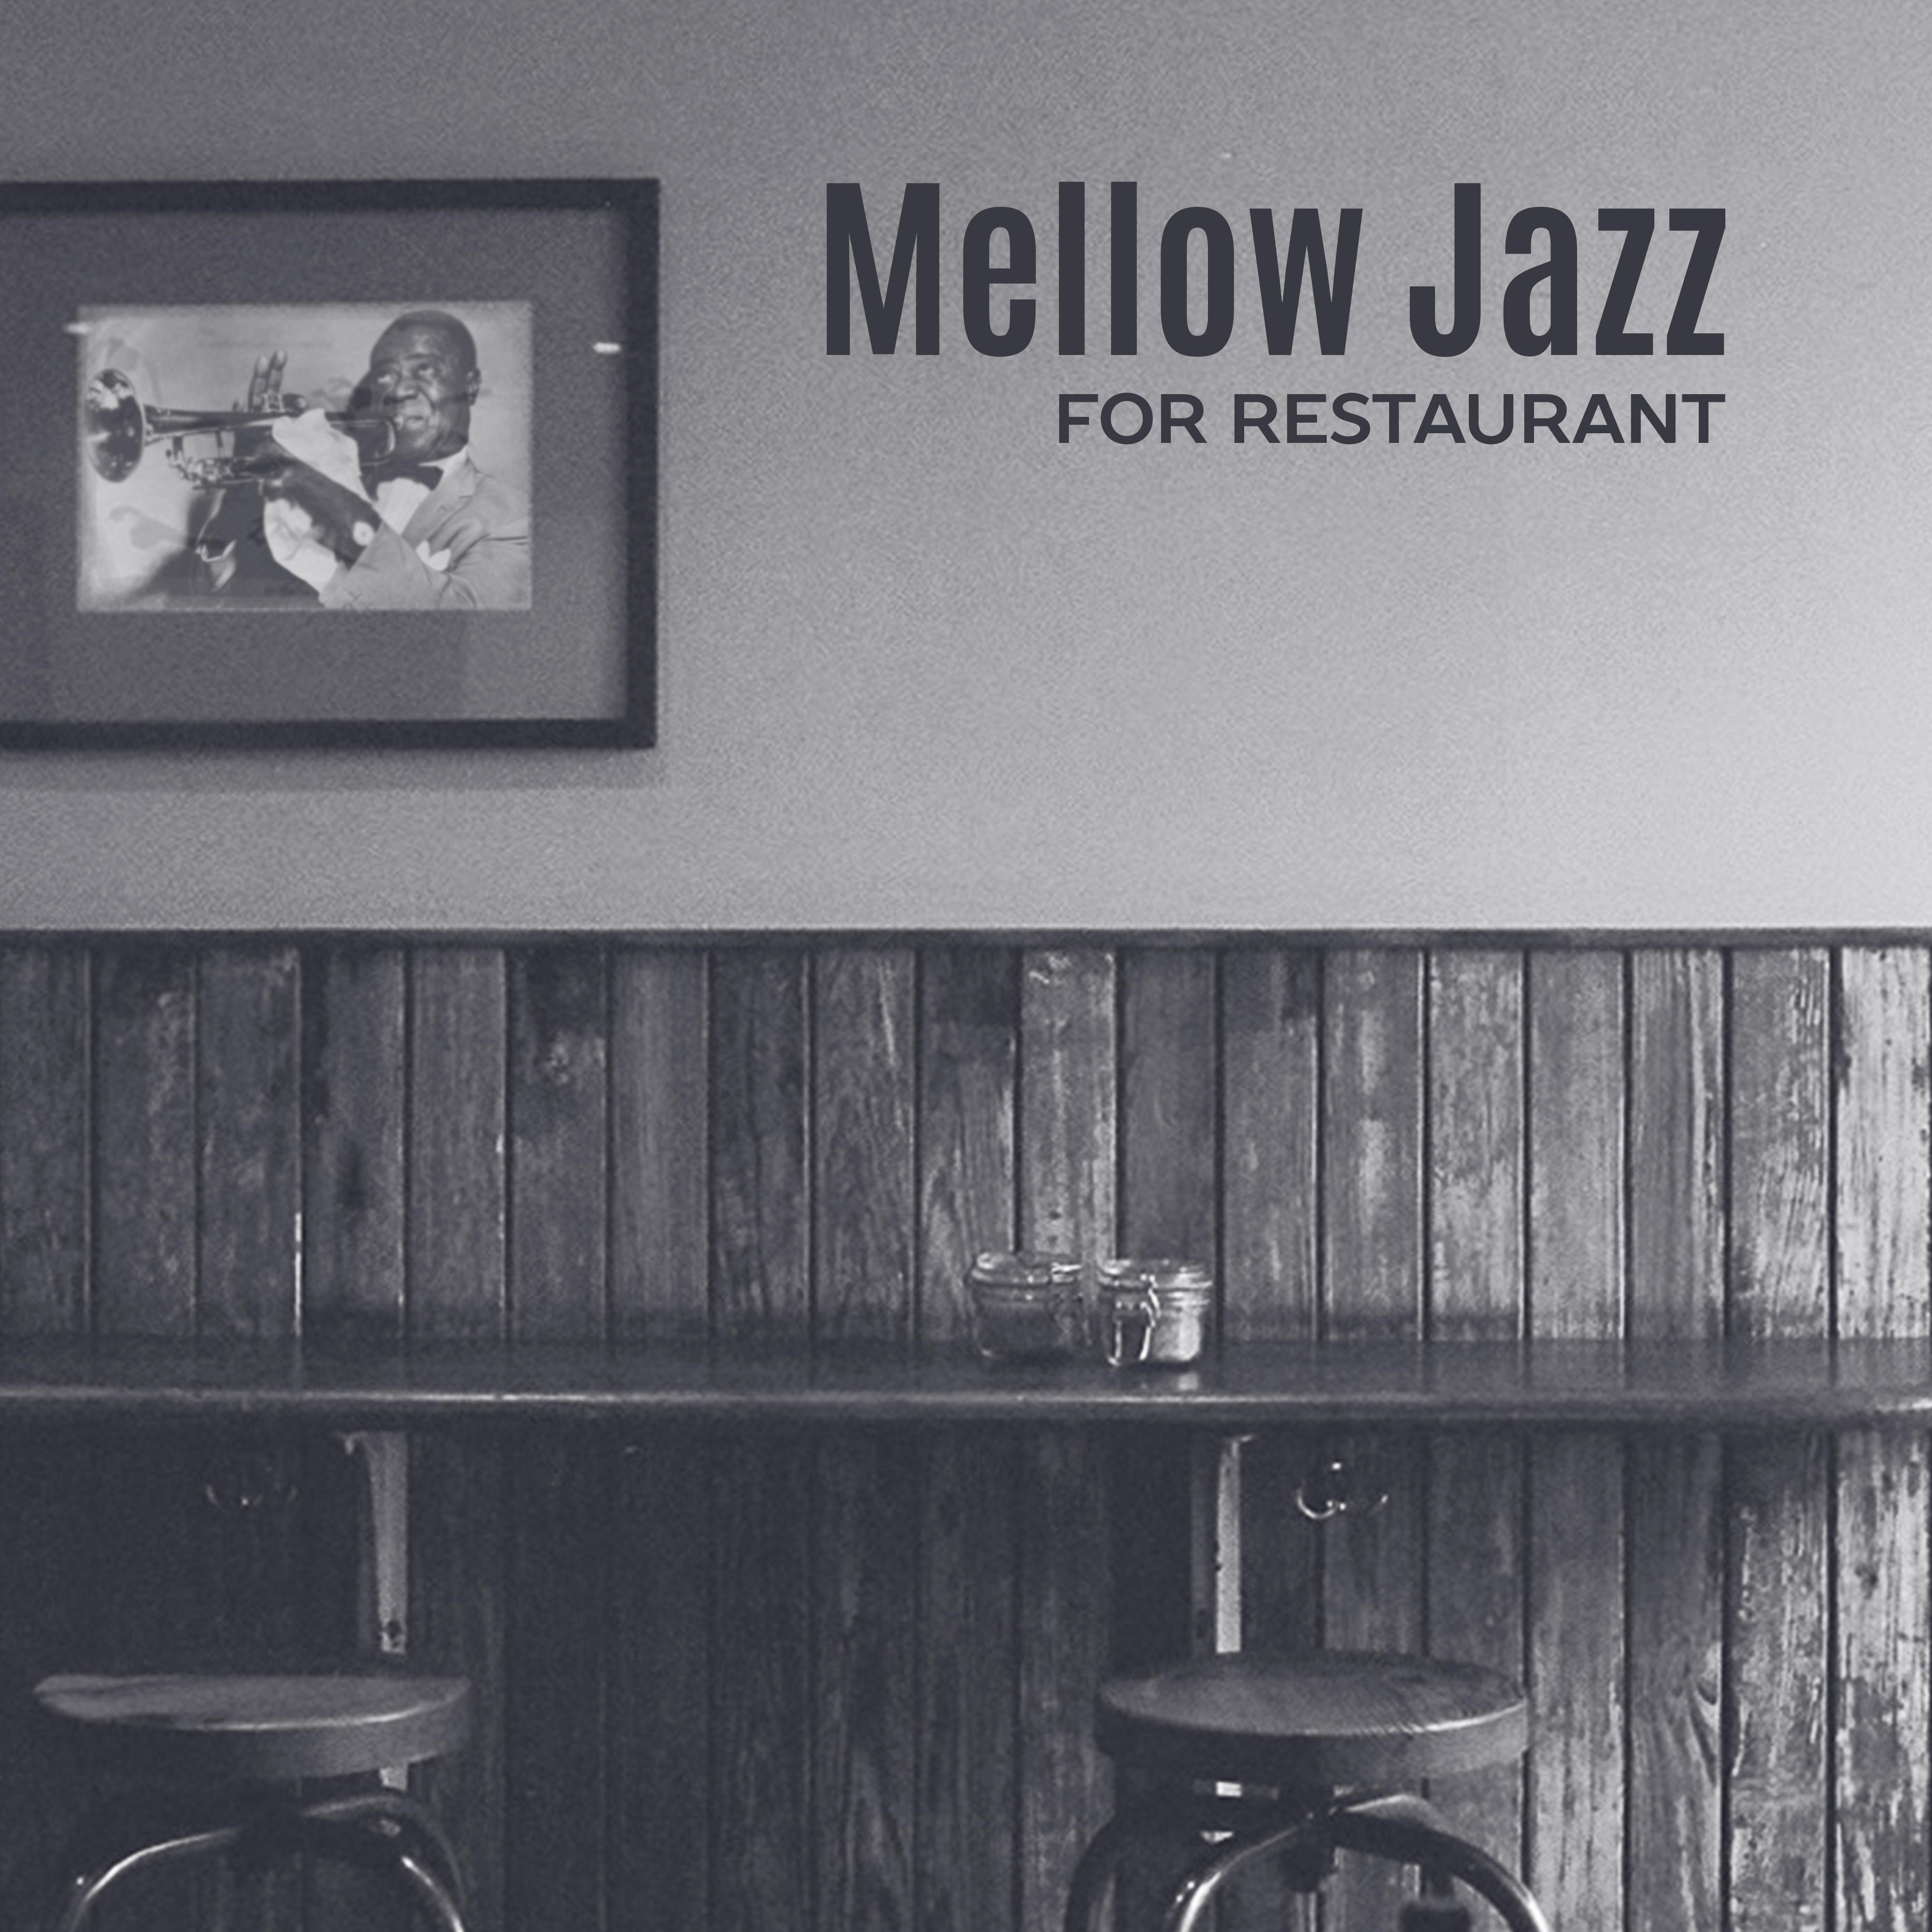 Mellow Jazz for Restaurant - Coffee Talk, Instrumental Sounds for Relaxation, Dinner with Friends, Soothing Piano, Free Time, Relax, Jazz Cafe